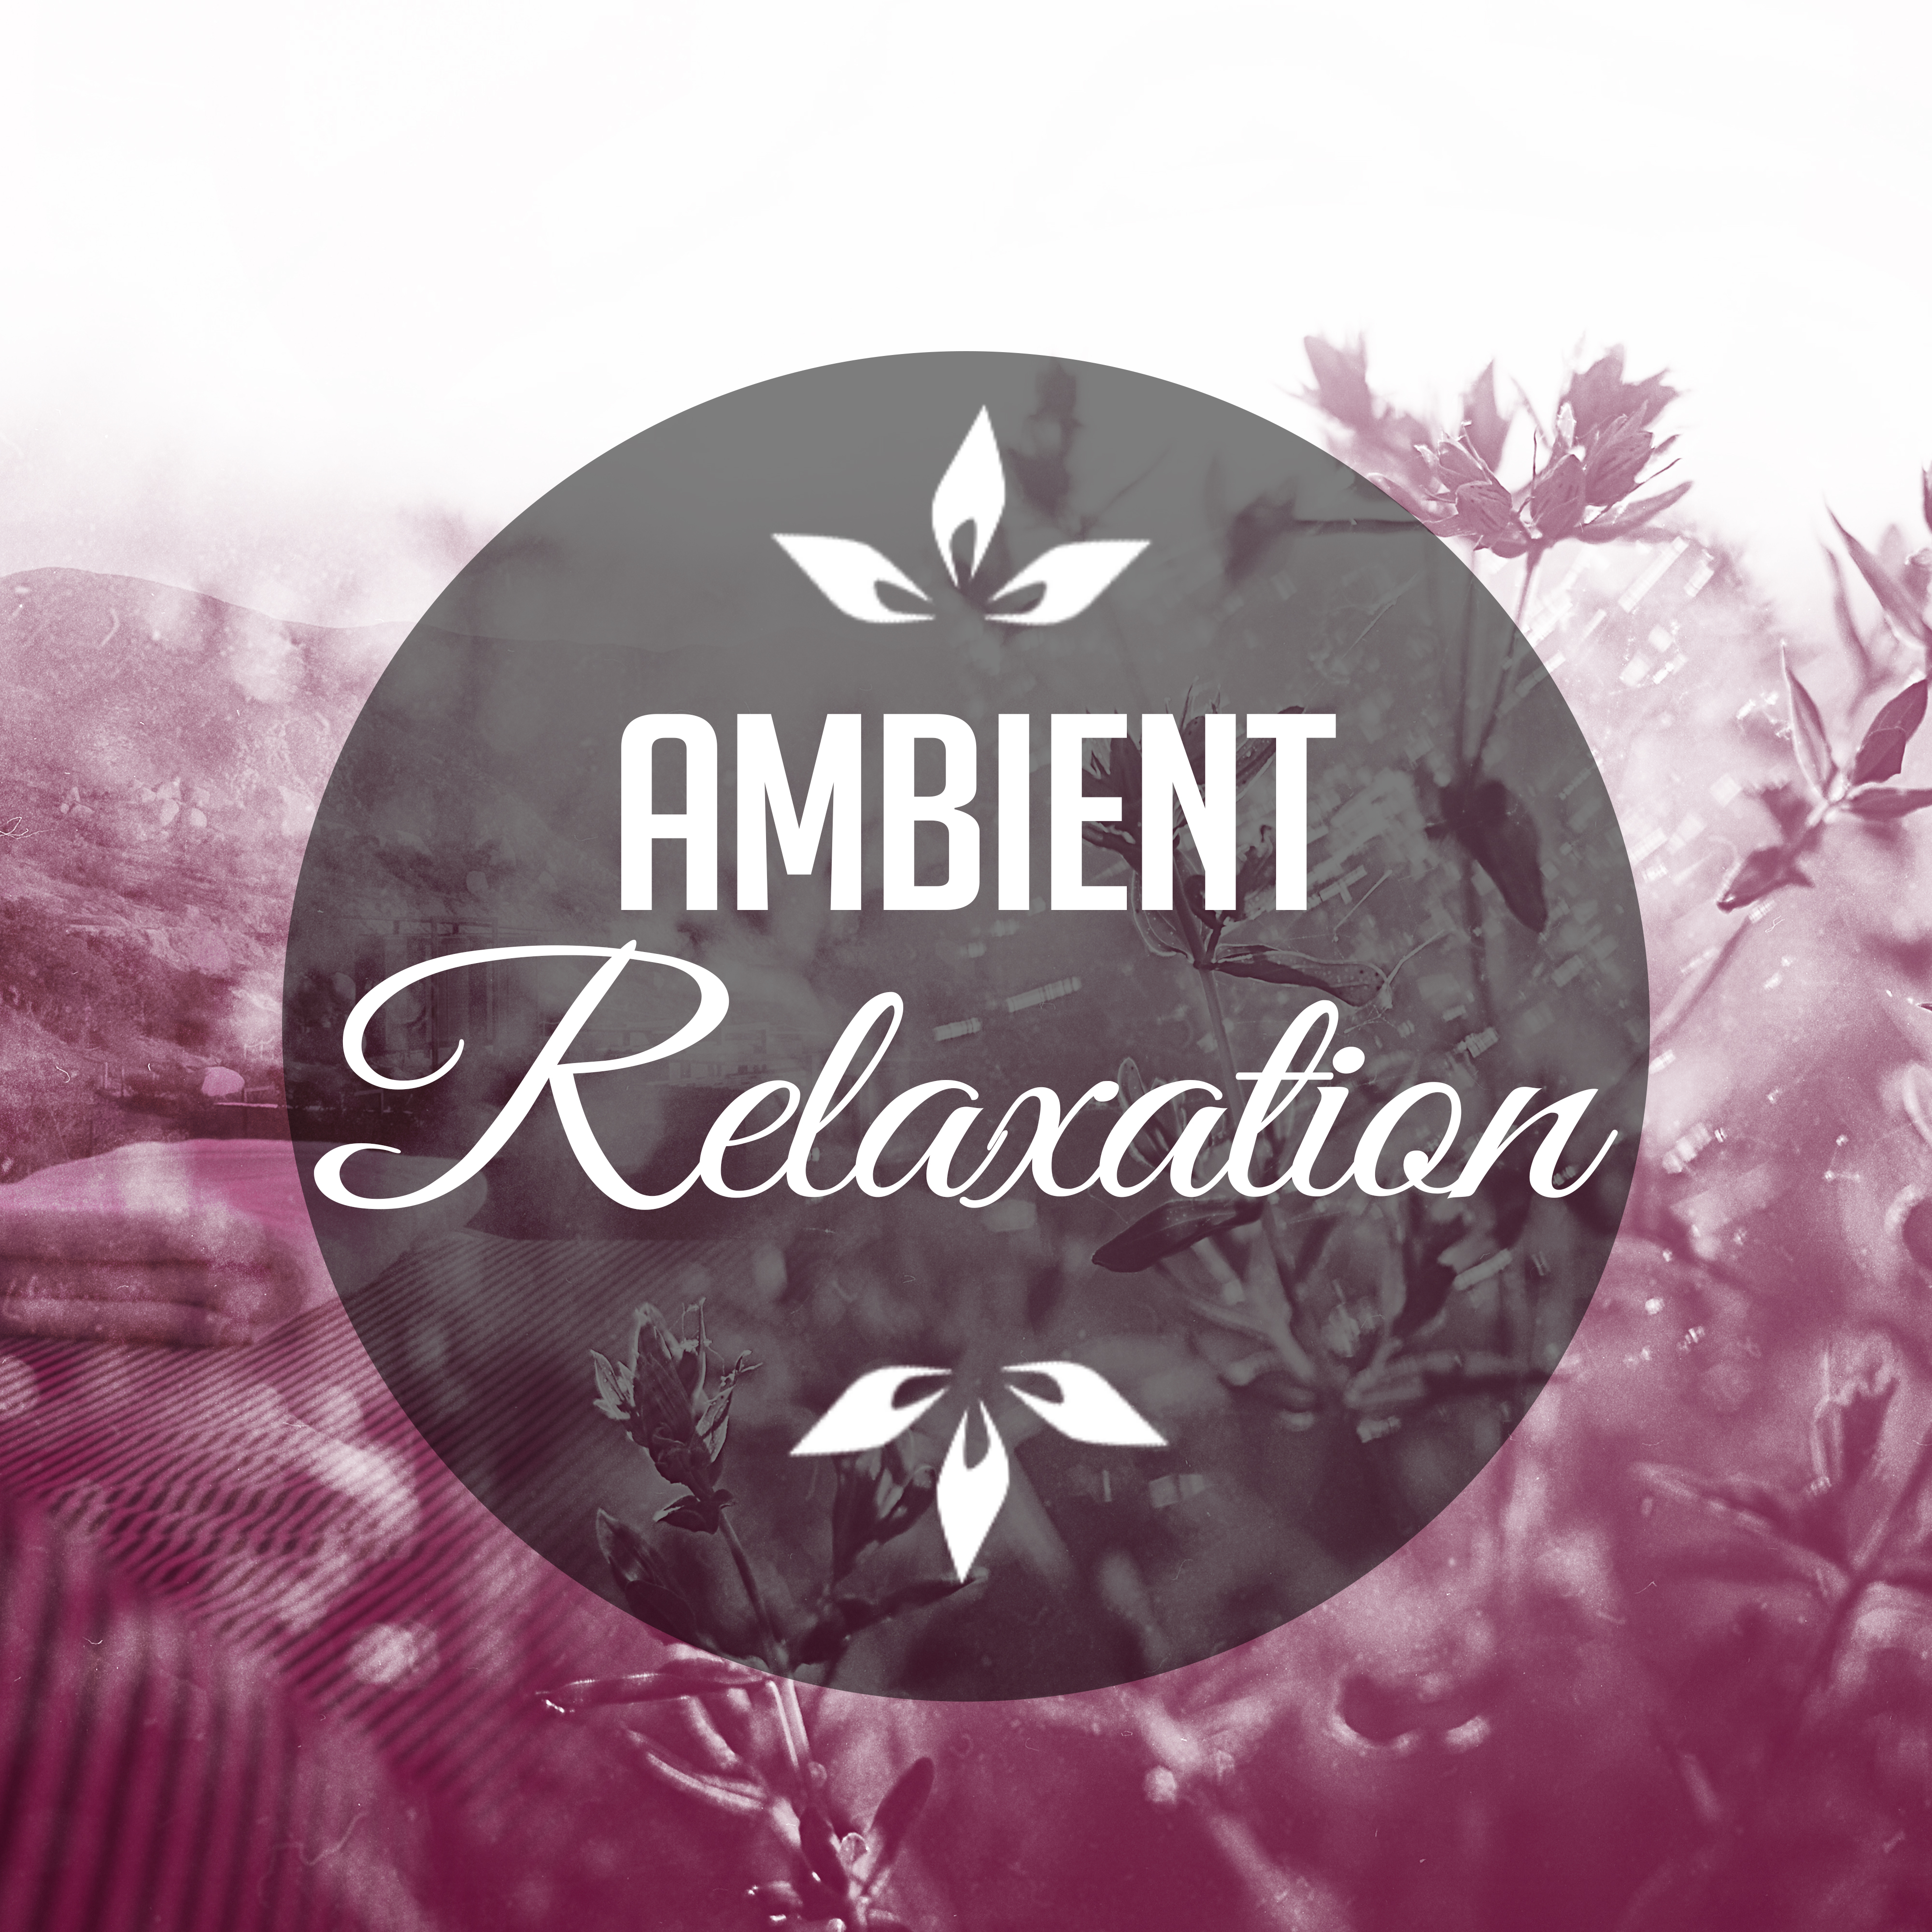 Ambient Relaxation  Relaxing Music for Manage Stress, Sounds of Nature, Relaxation Spa Music, Rest